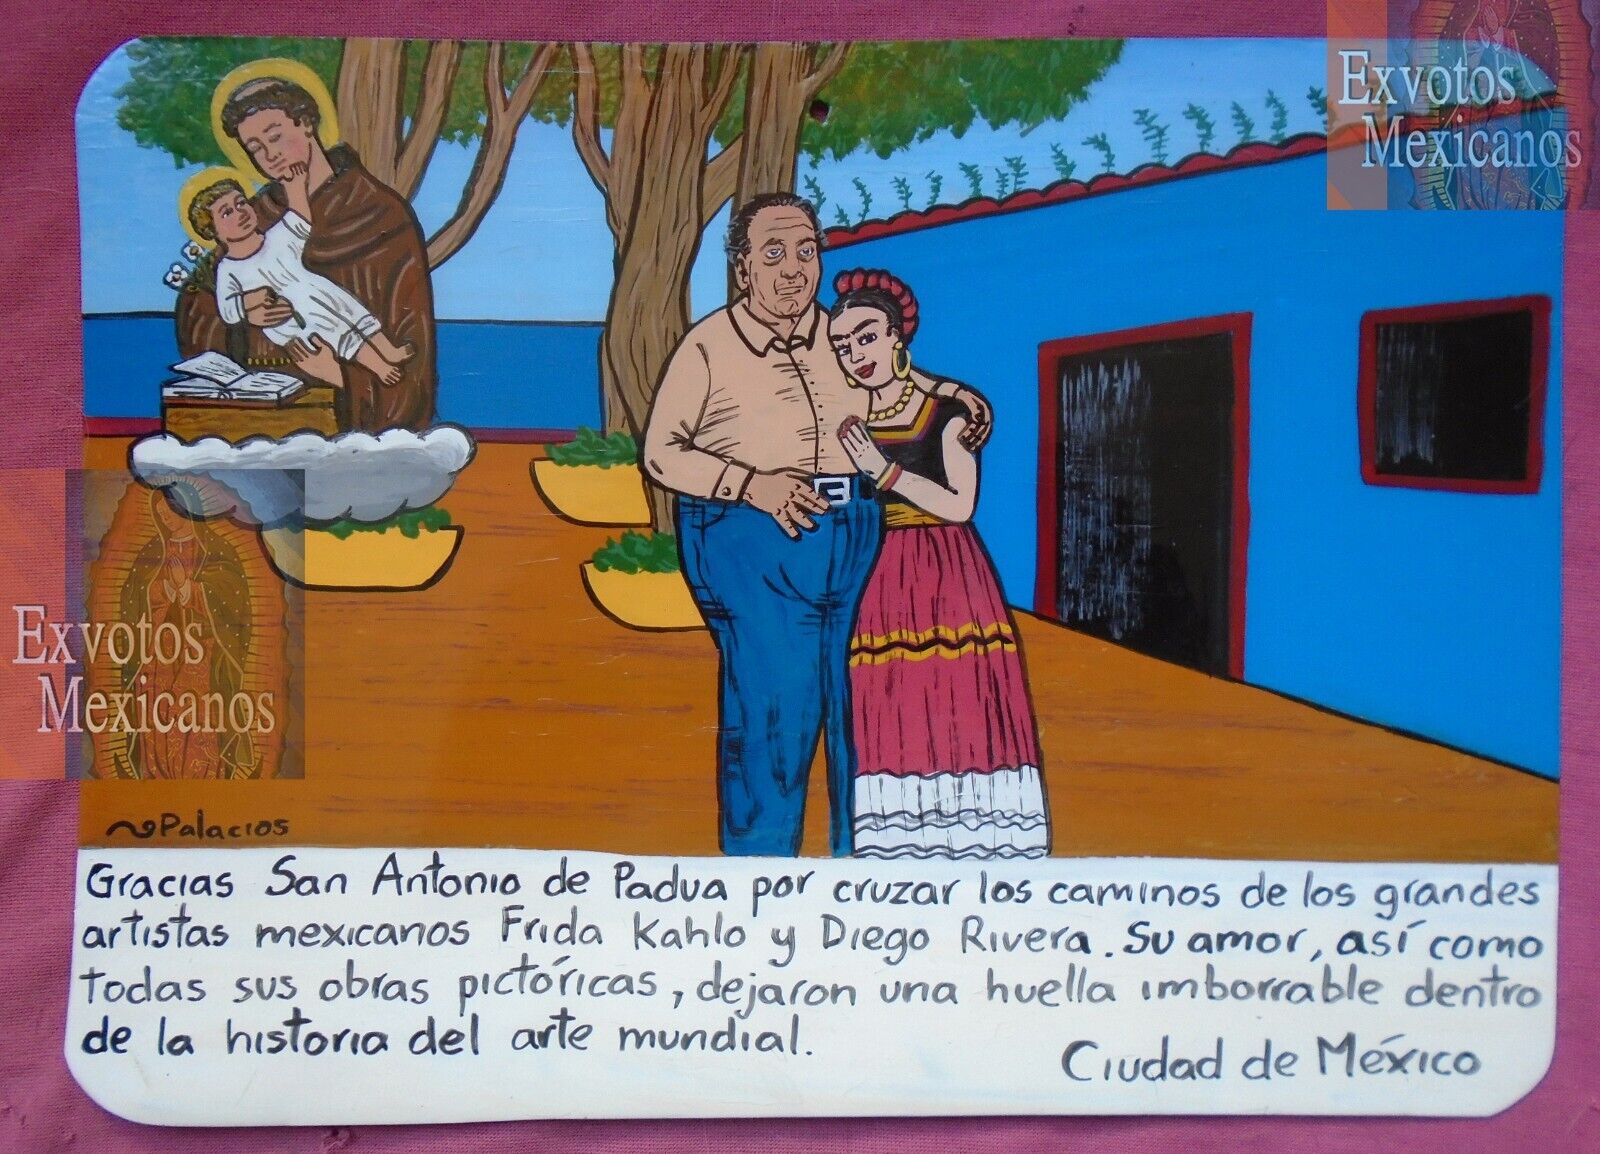 Exvoto dedicated to Frida Kahlo and Diego Rivera in their Casa Azul hand painted